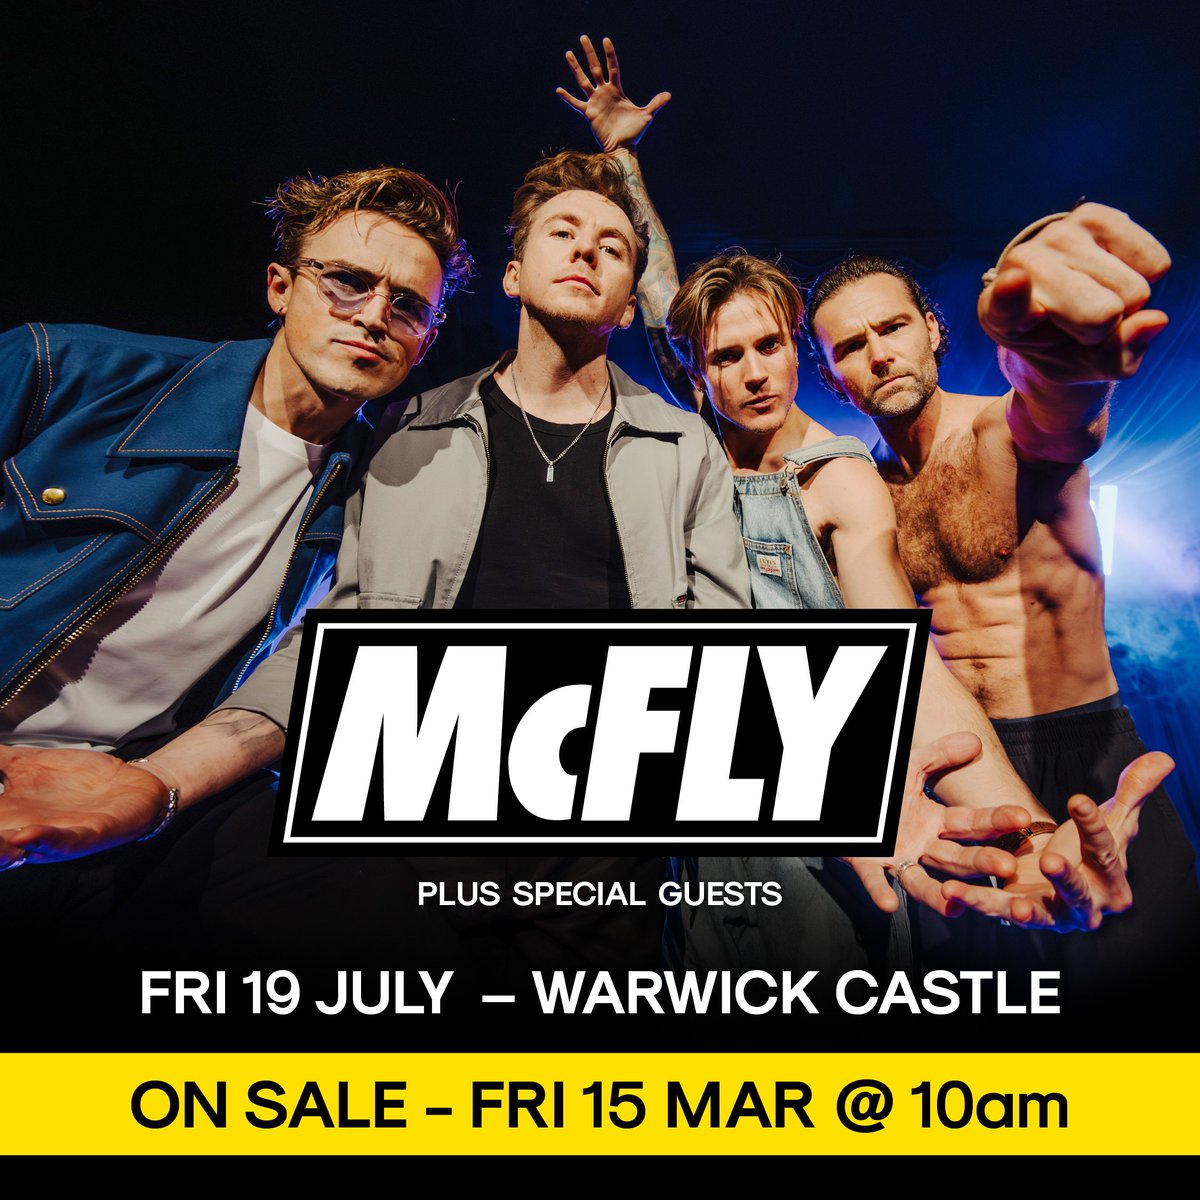 With a growing schedule of summer shows, @mcflymusic have announced they'll be heading to Warwick Castle on July 19! Ooh-ooh-ooh-ooh, wouldn't you like to come with us? Tickets are on sale now 👉tinyurl.com/2r7hfacj